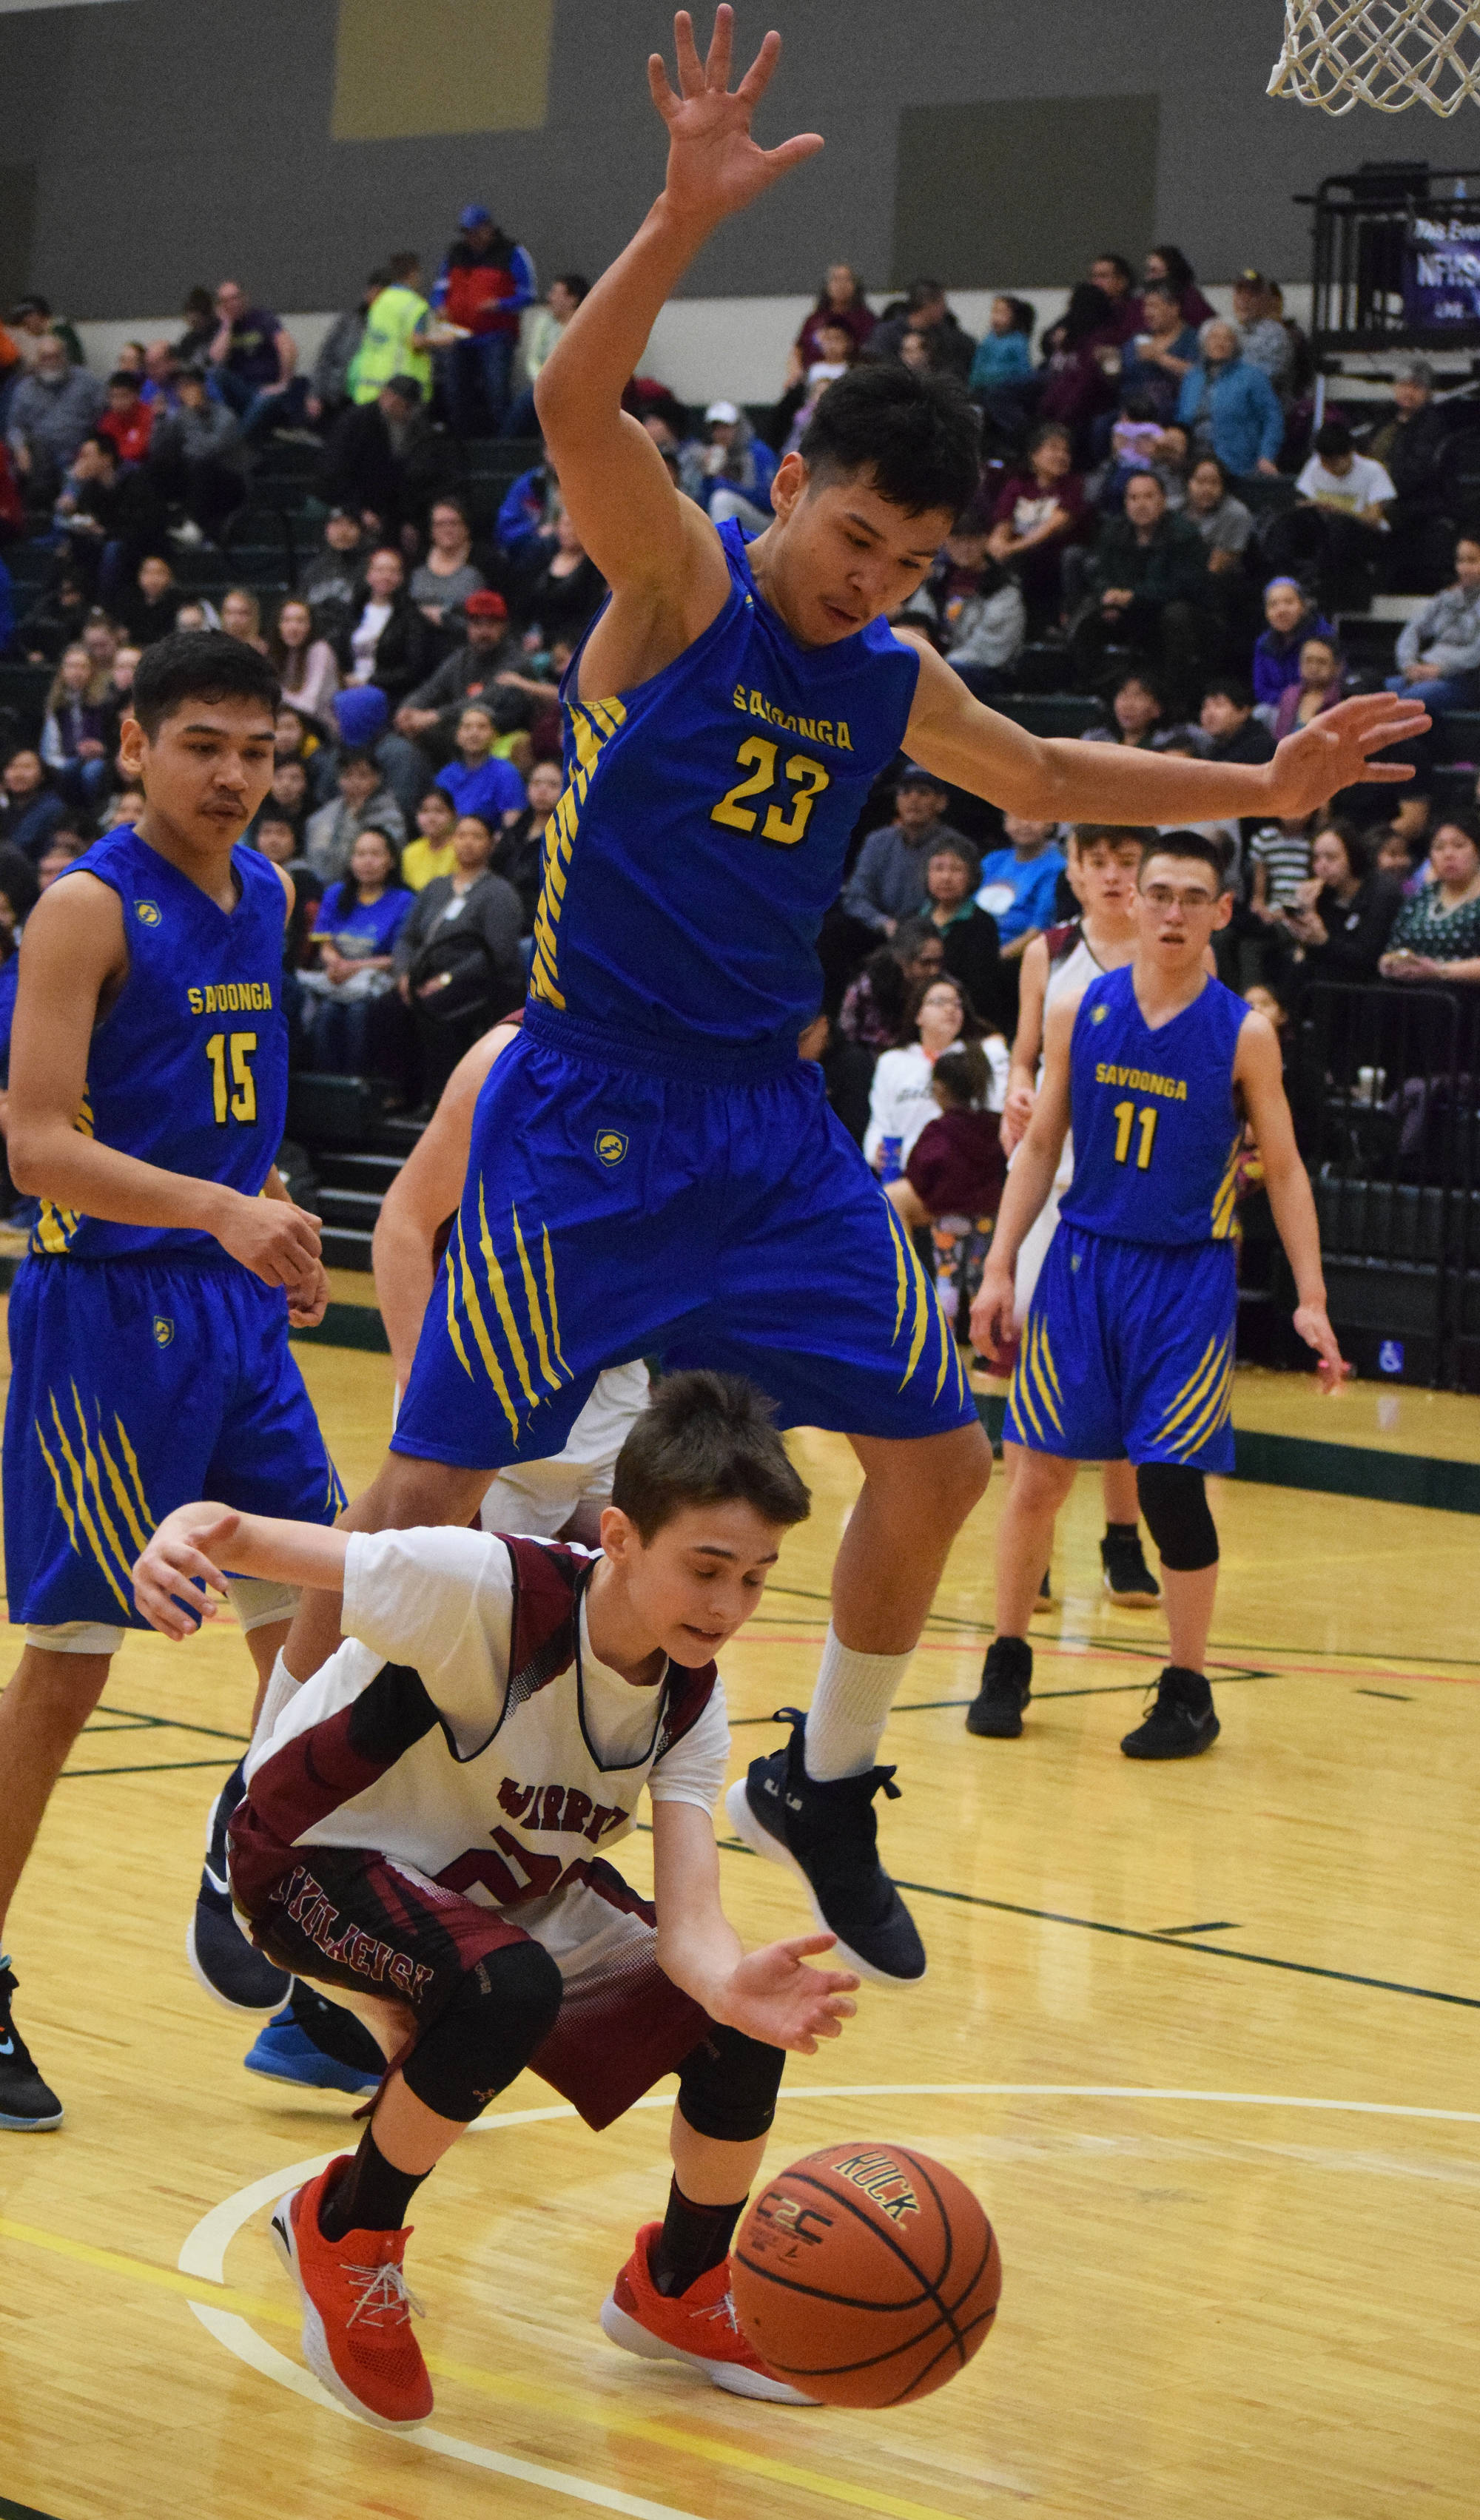 Nikolaevsk’s Lukah Kalugin ducks under the block of Savoonga’s Derek Seppilu (23) Friday at the Class 1A state tournament at the Alaska Airlines Center in Anchorage. (Photo by Joey Klecka/Peninsula Clarion)